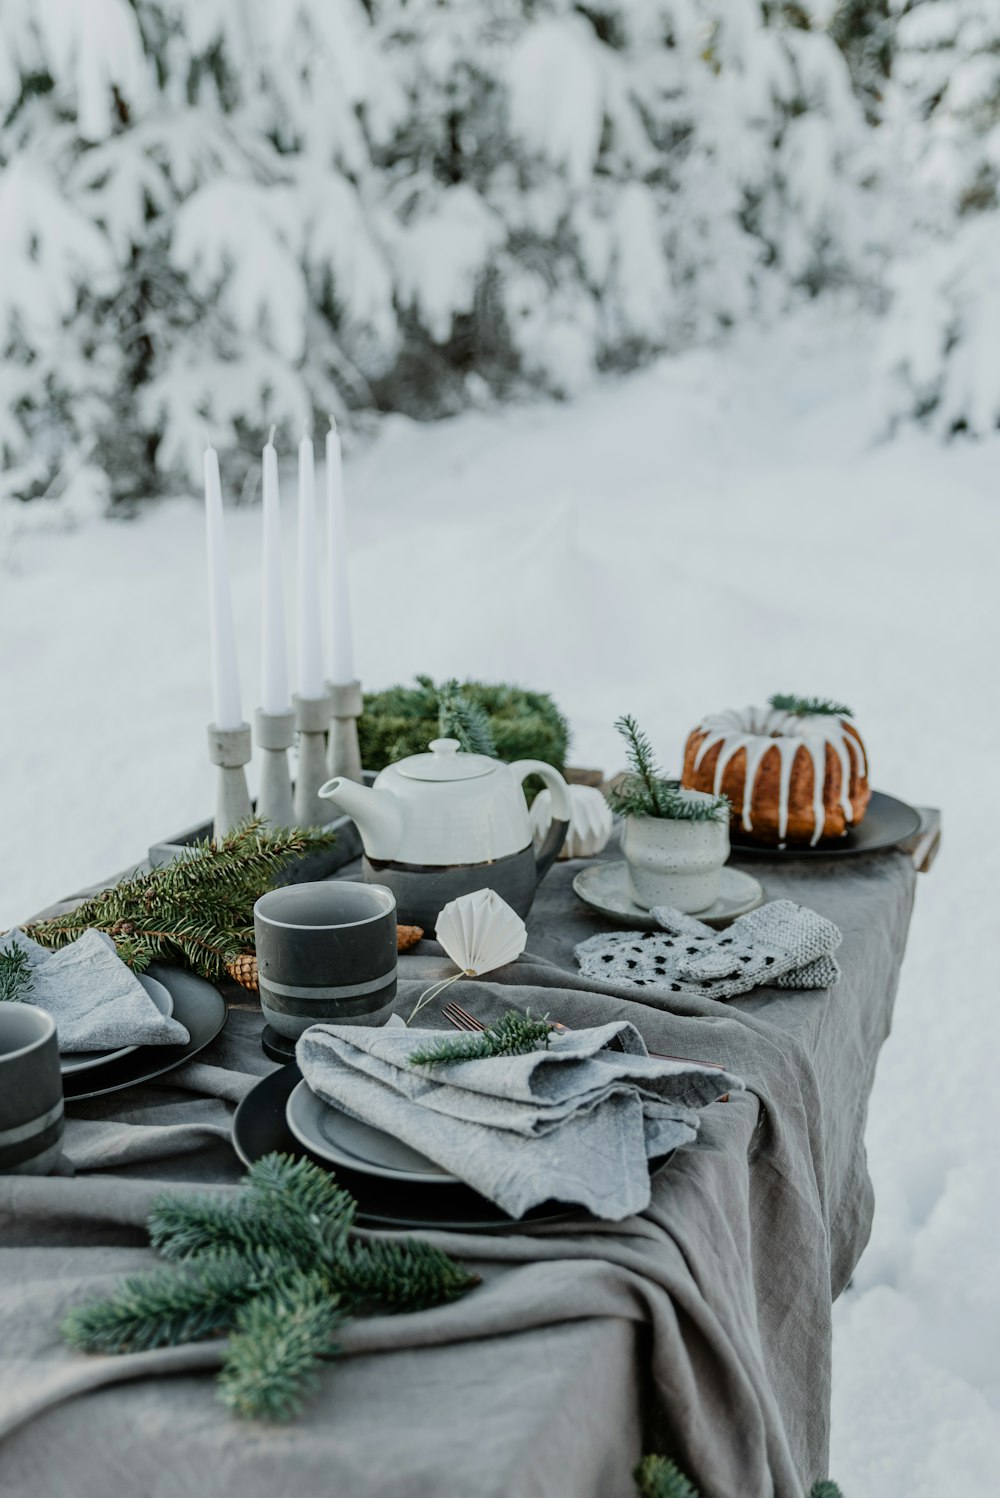 a table topped with dishes and candles in the snow